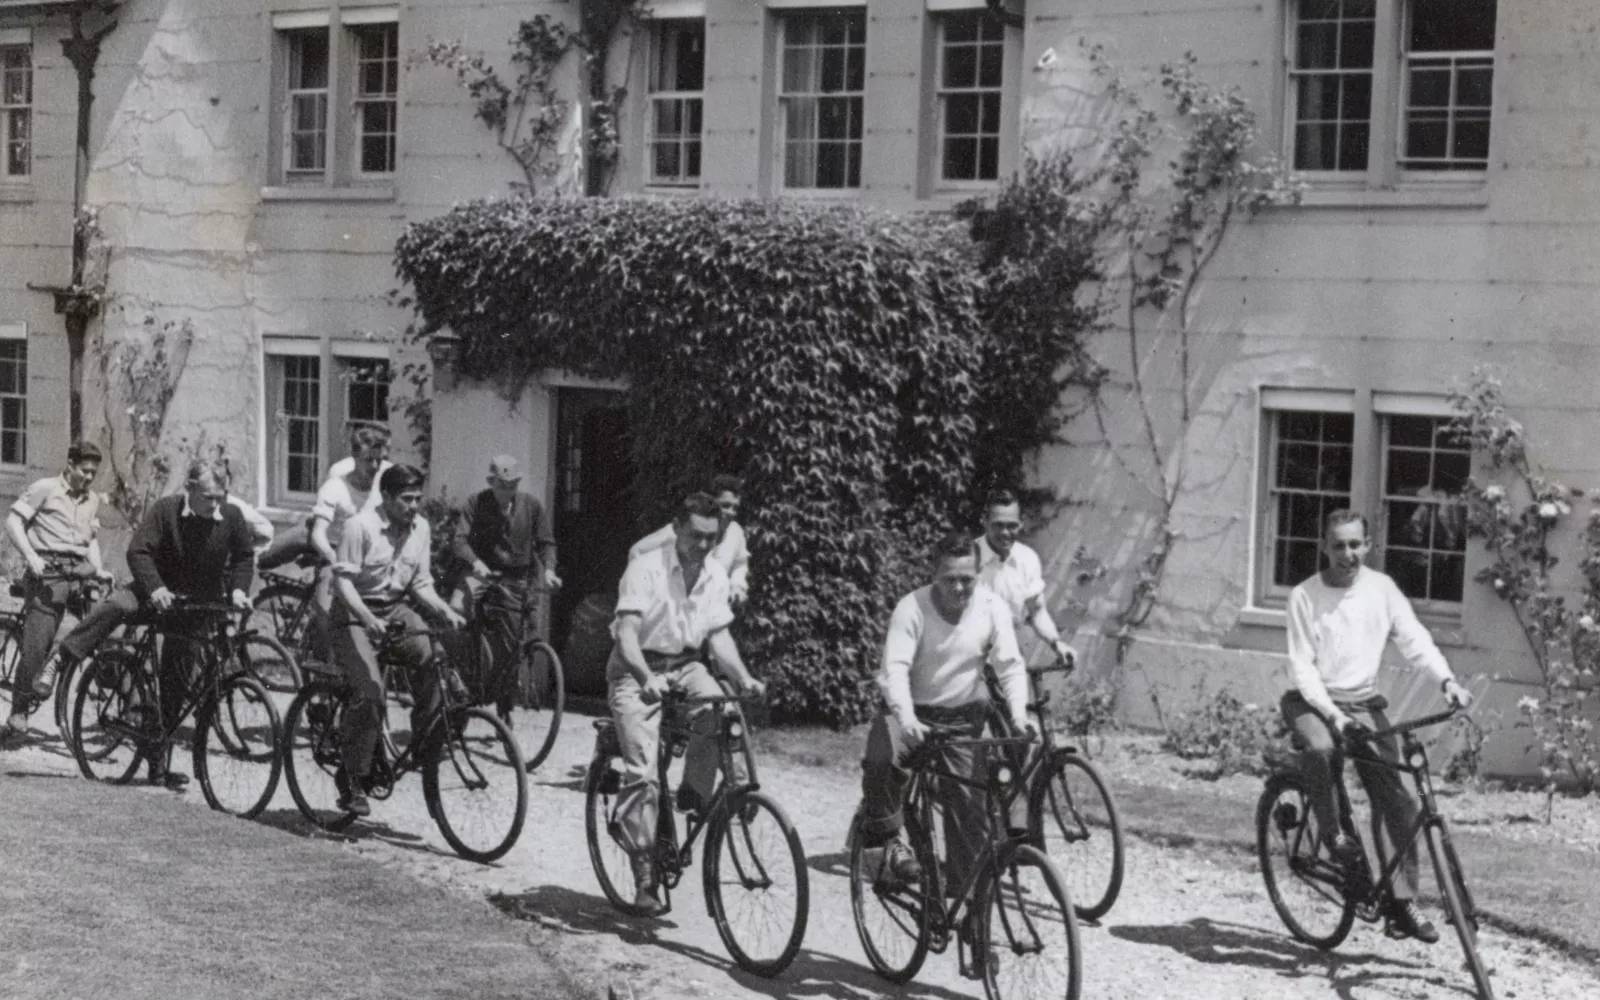 <em>For "Jews from Brooklyn" who didn't ride horses, Rest Homes offered a variety of activities including bike riding (American Air Museum in Britain)</em>